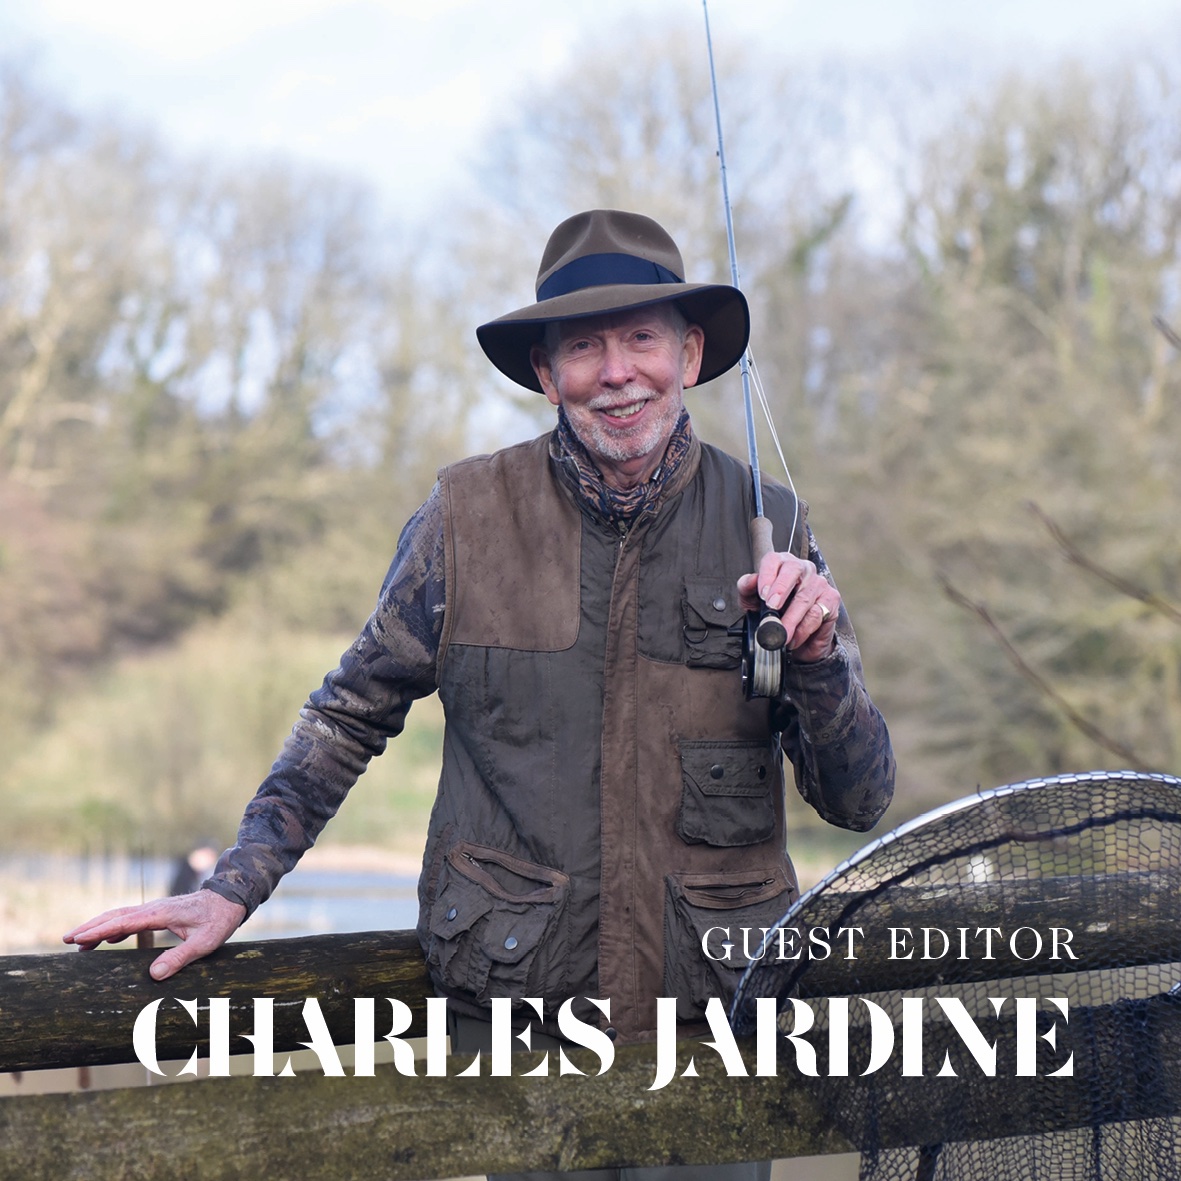 This issue’s guest editor, Charles Jardine, is arguably Britain’s foremost angler. After spending a lifetime in the fishing industry. Read more about his lengthy CV in the latest issue of Fieldsports Journal, out now.